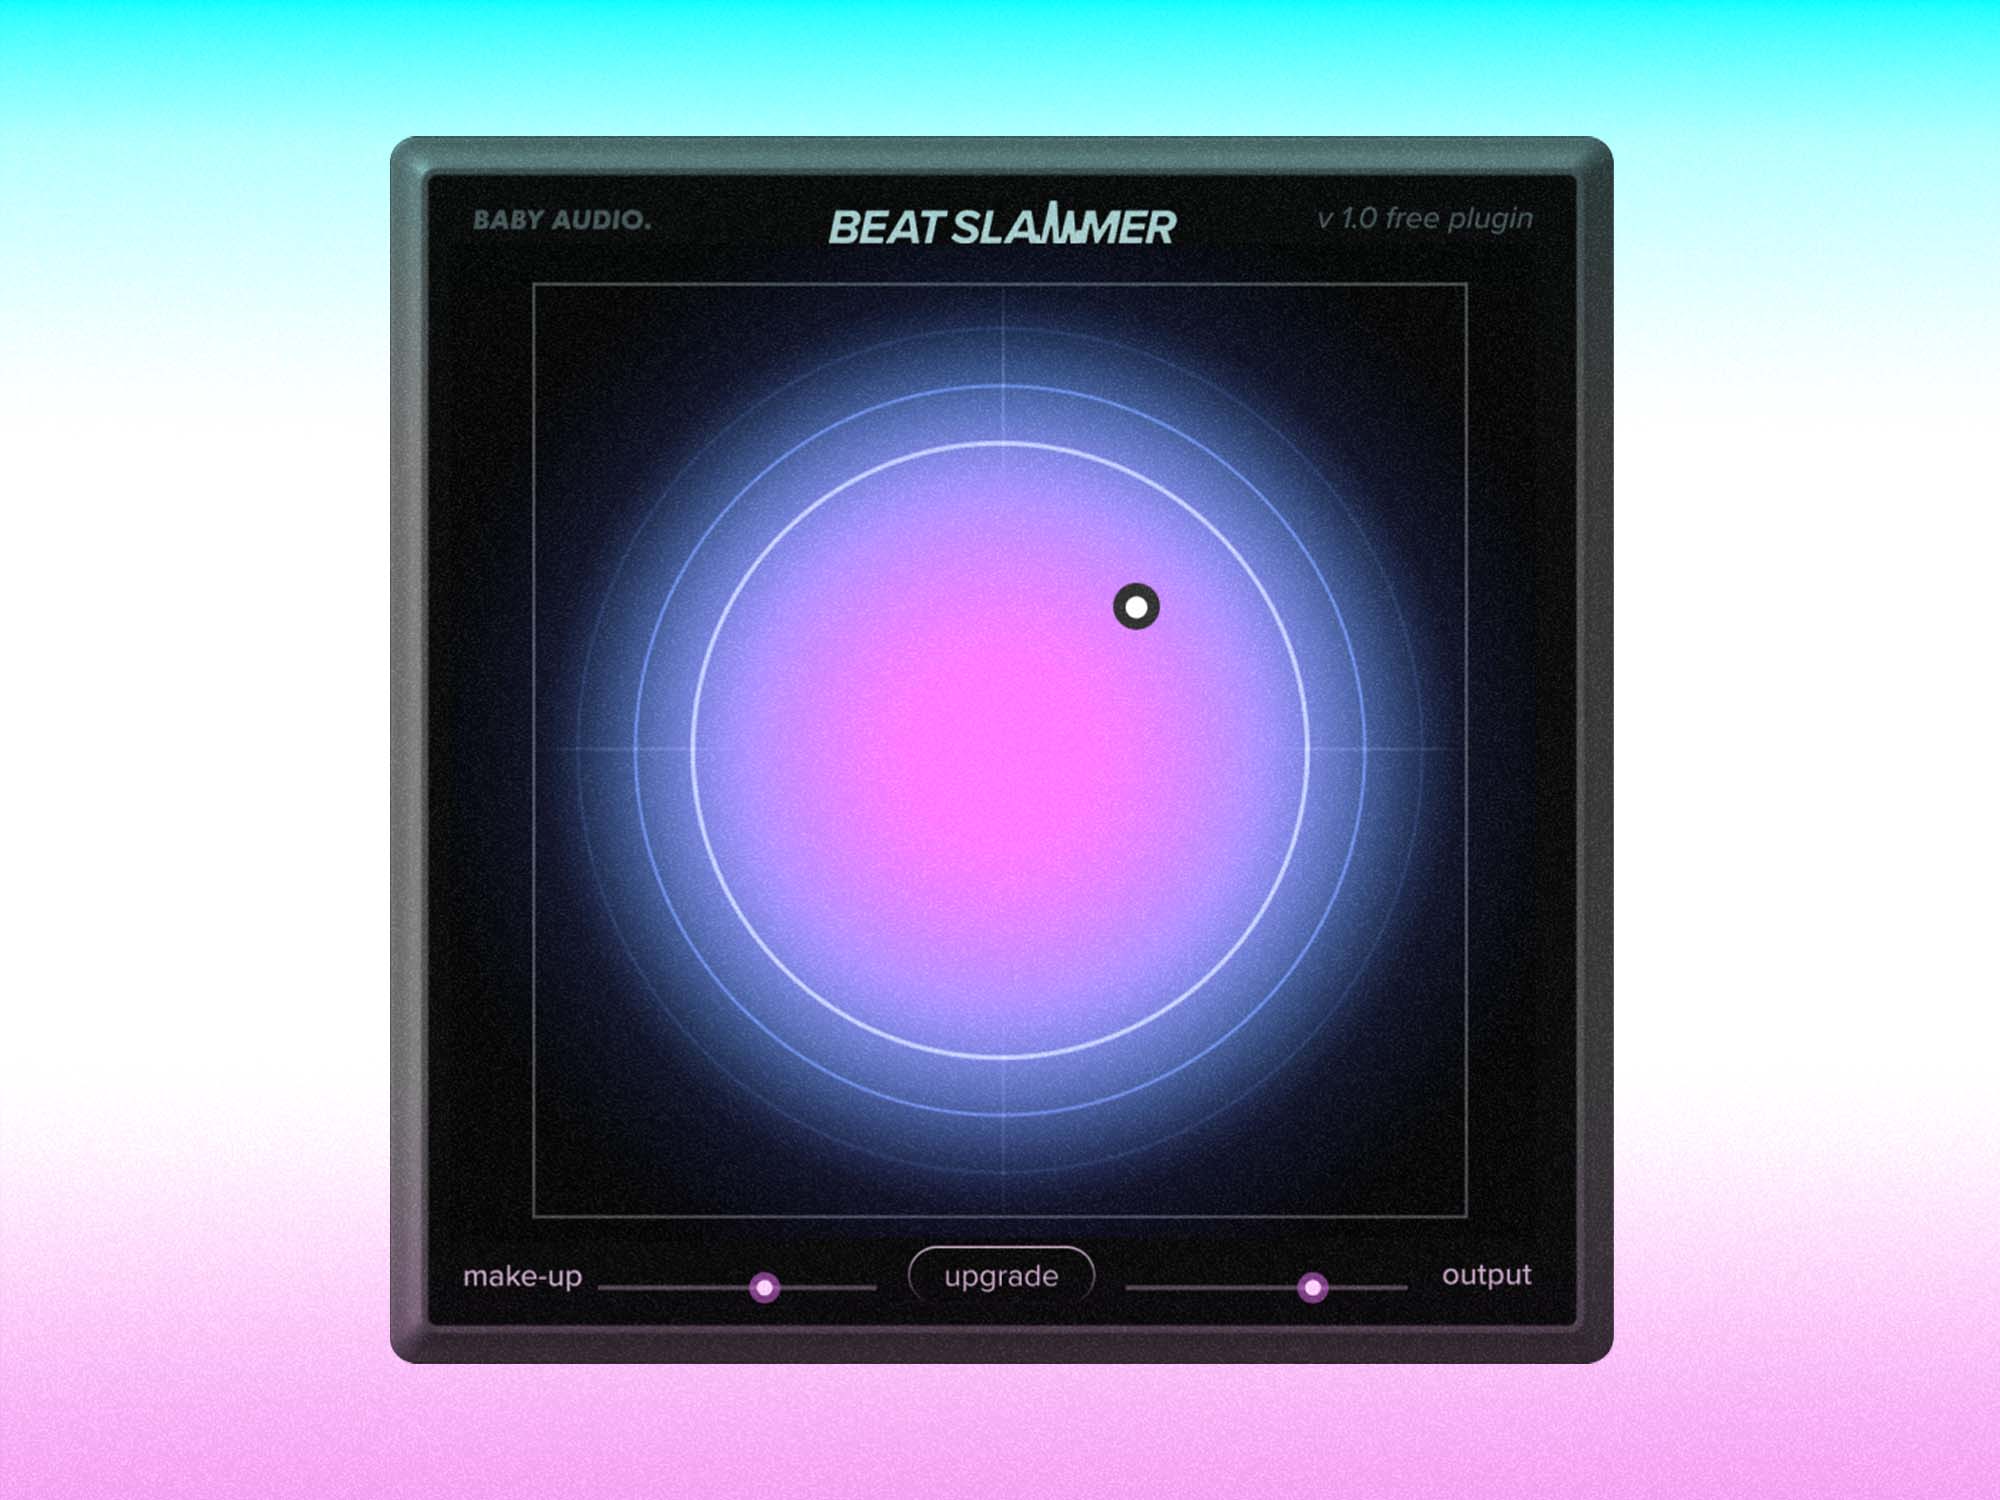 Baby Audio Beat Slammer. It is a small, square shape, with a glowing purple circle shape in the middle.